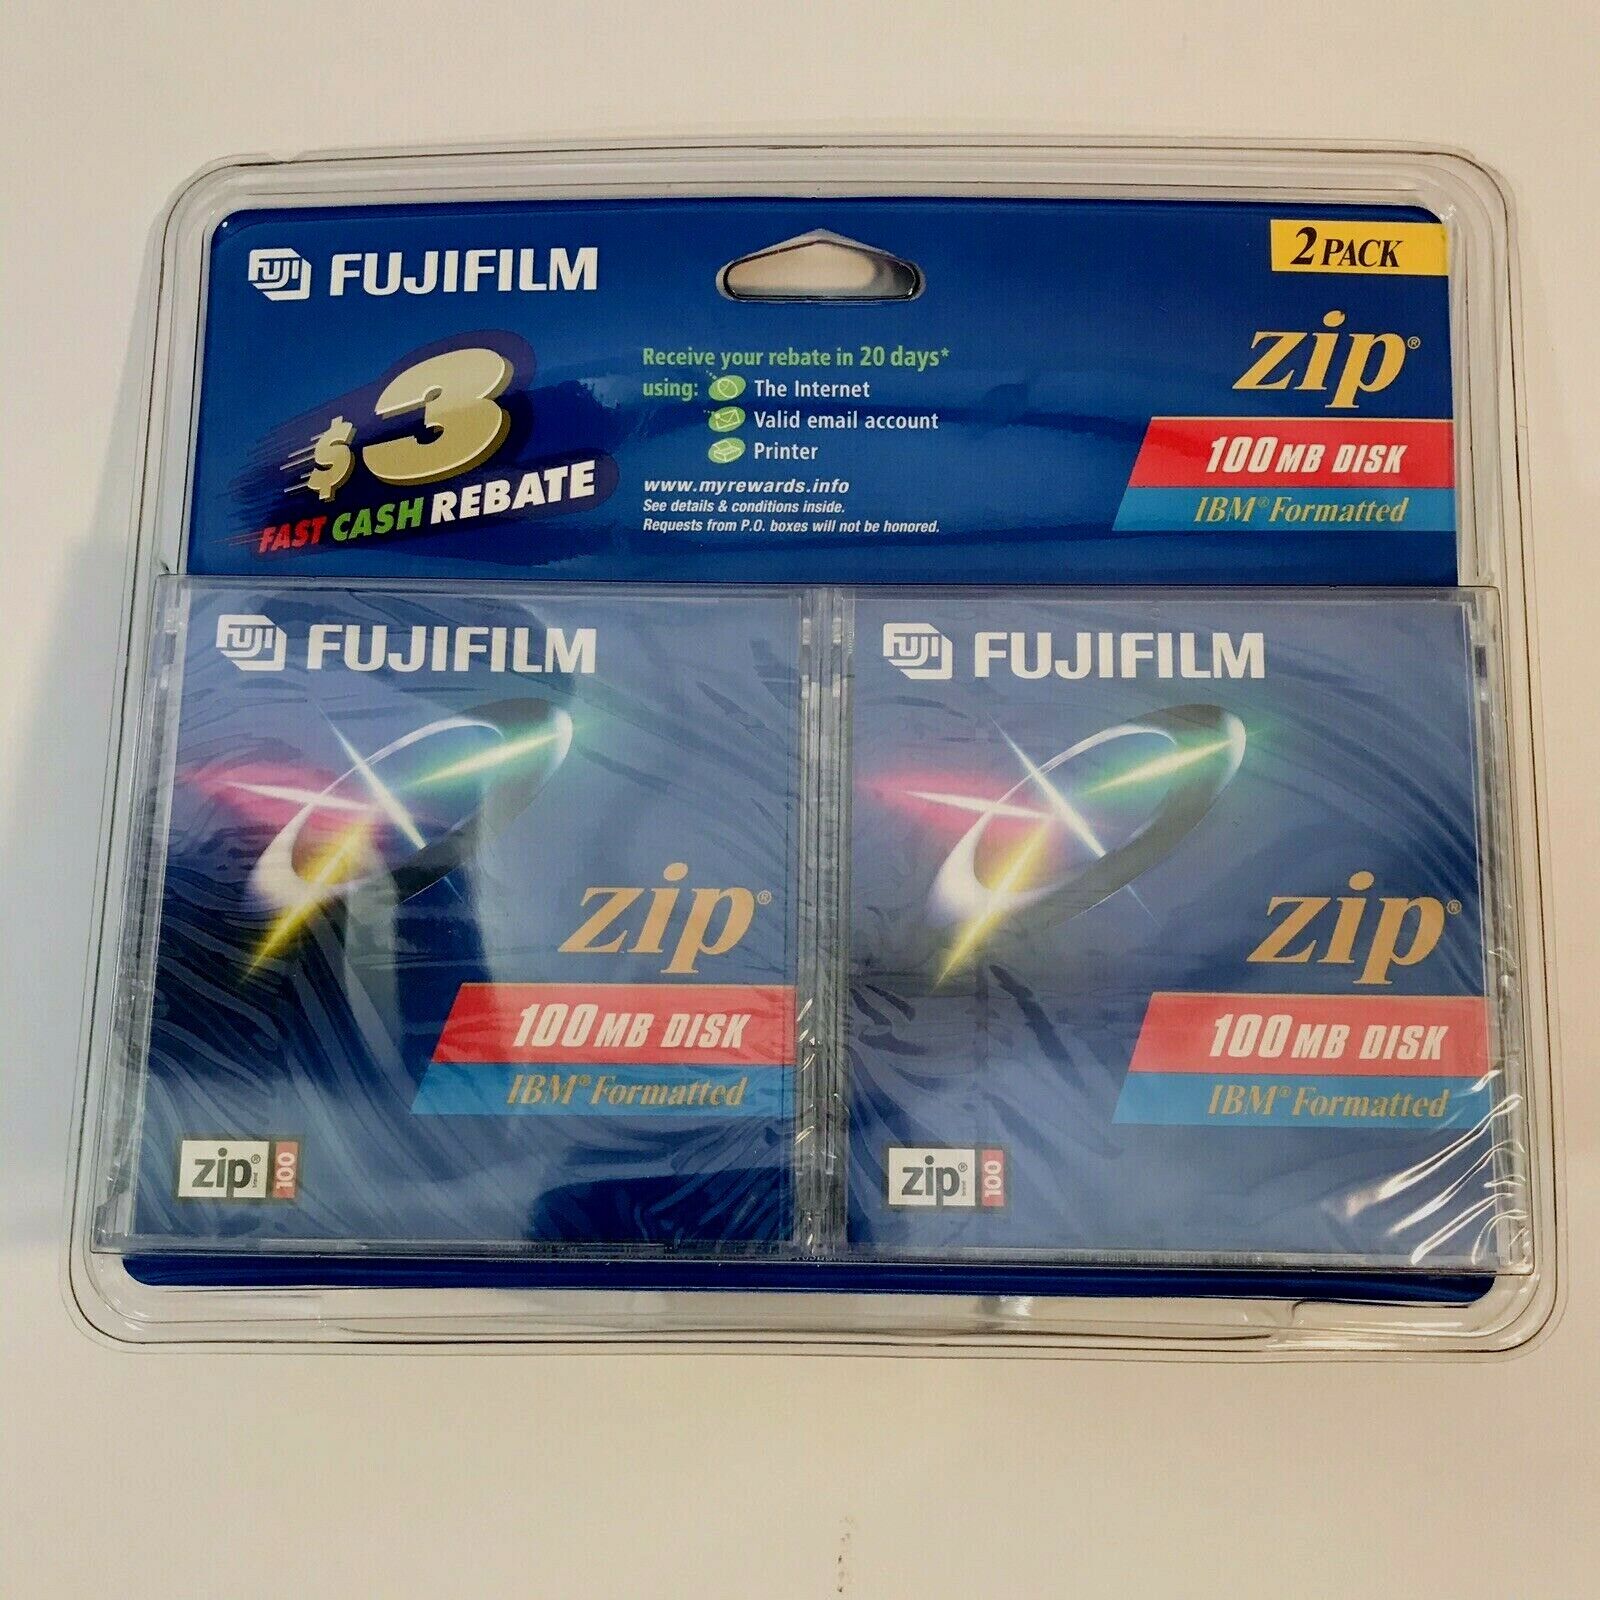 Fujifilm Zip 100 MB Disk IBM Formatted For Use With All Zip 250 Drives *2 Pack*